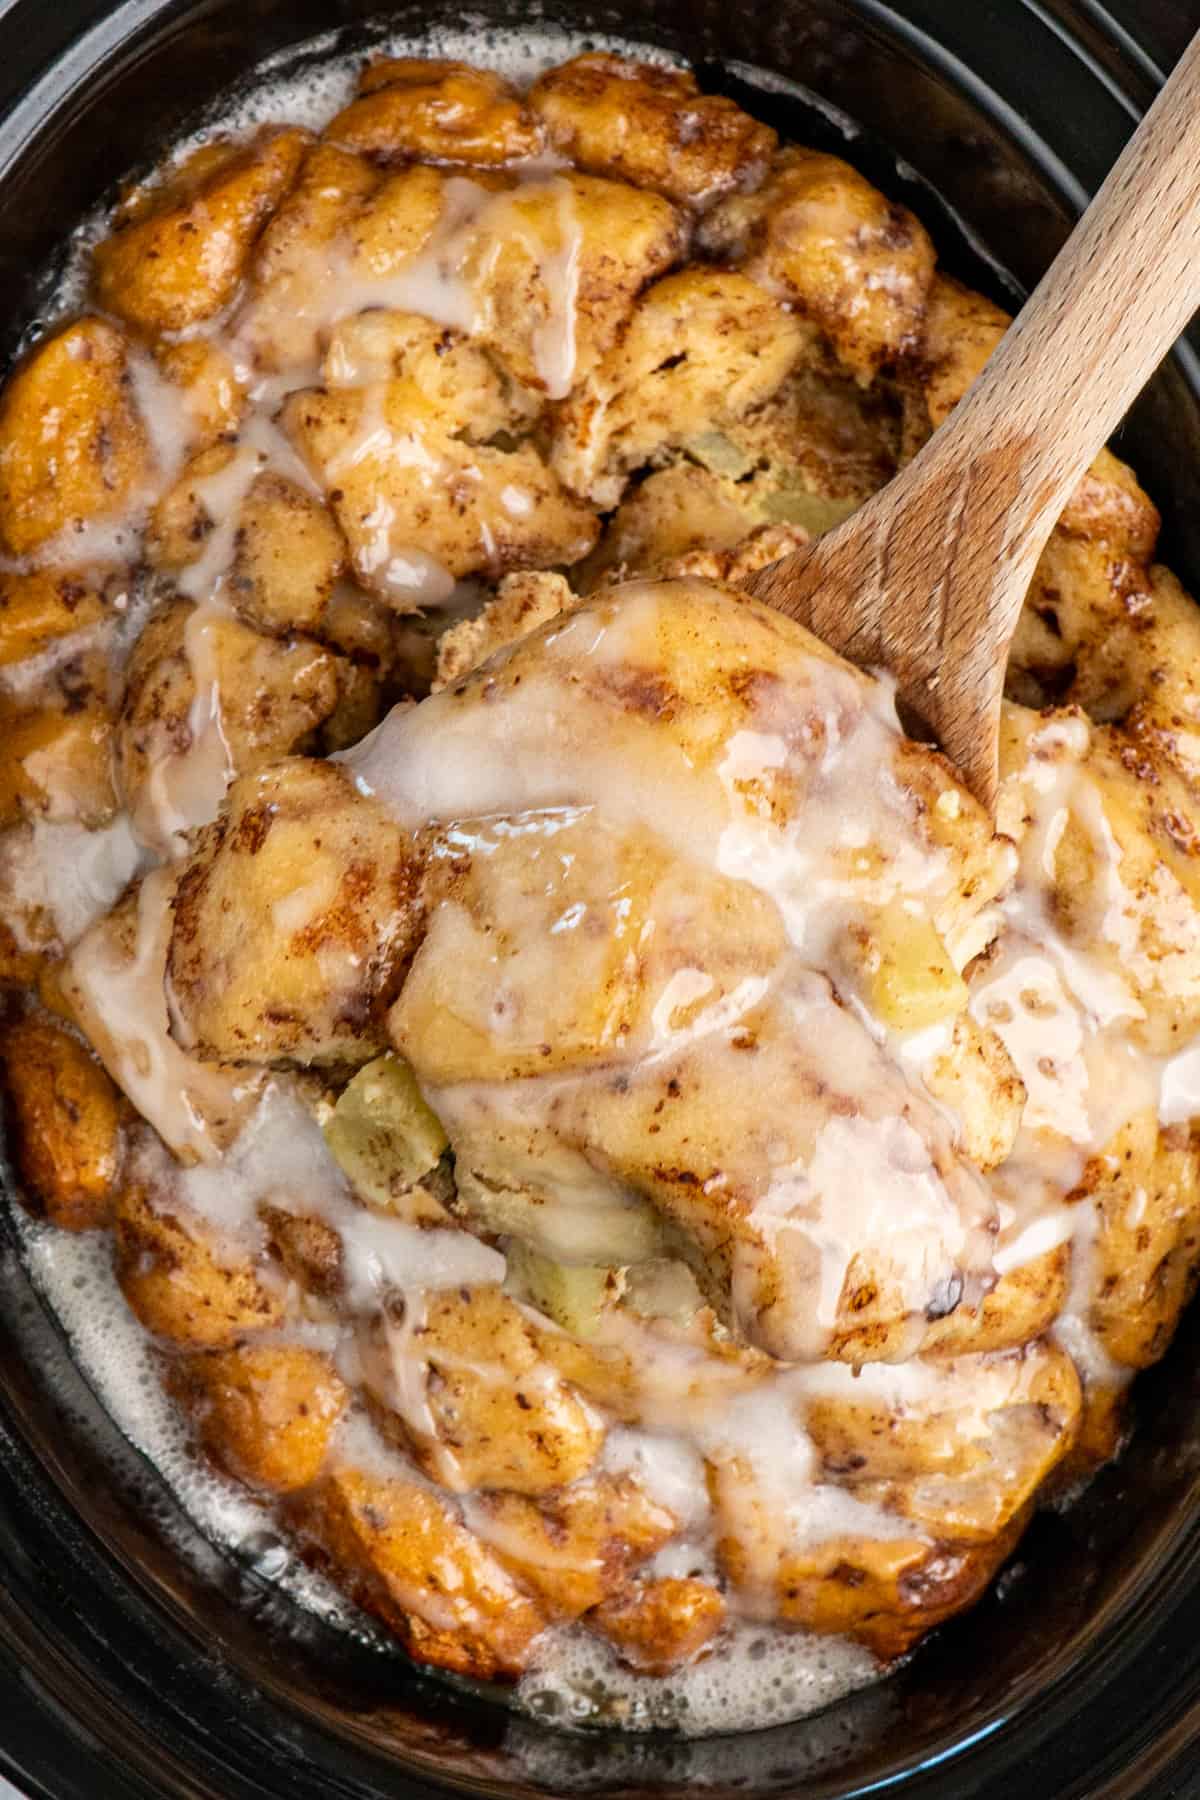 Apple cinnamon rolls being held with a wooden spoon over a slow cooker.